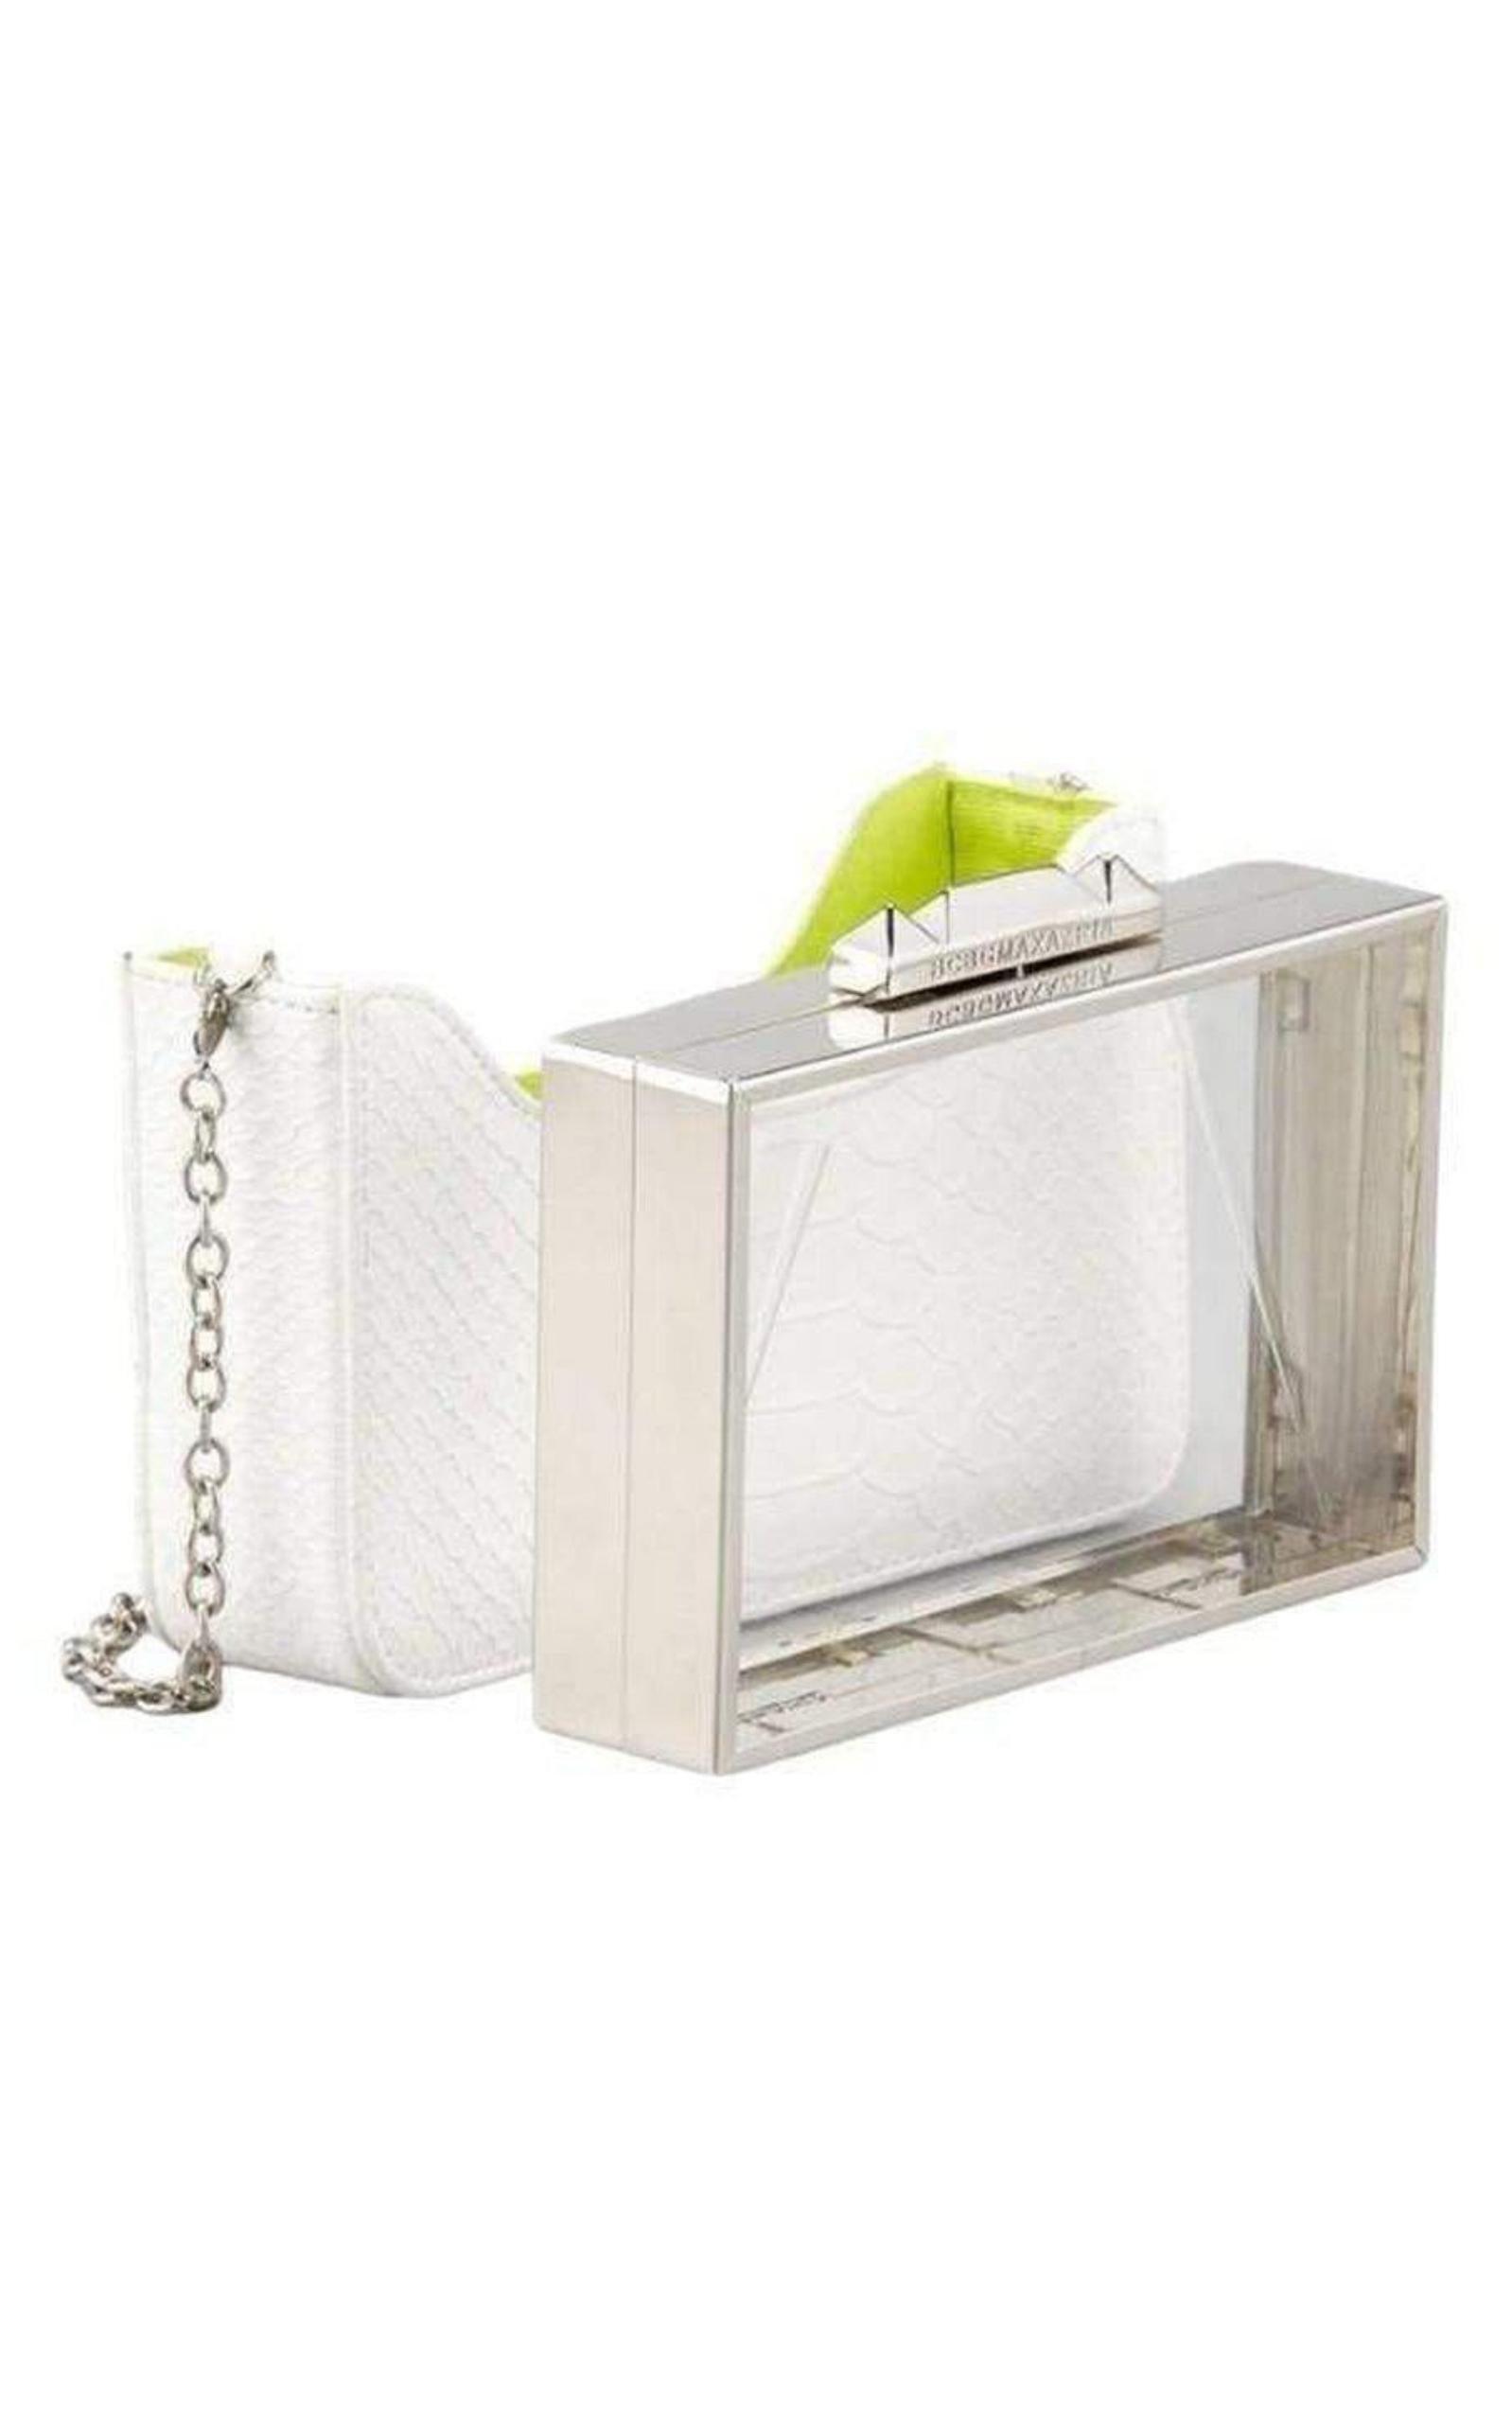  BCBGMAXAZRIACrawford Lucite White Clutch with Shell - Runway Catalog